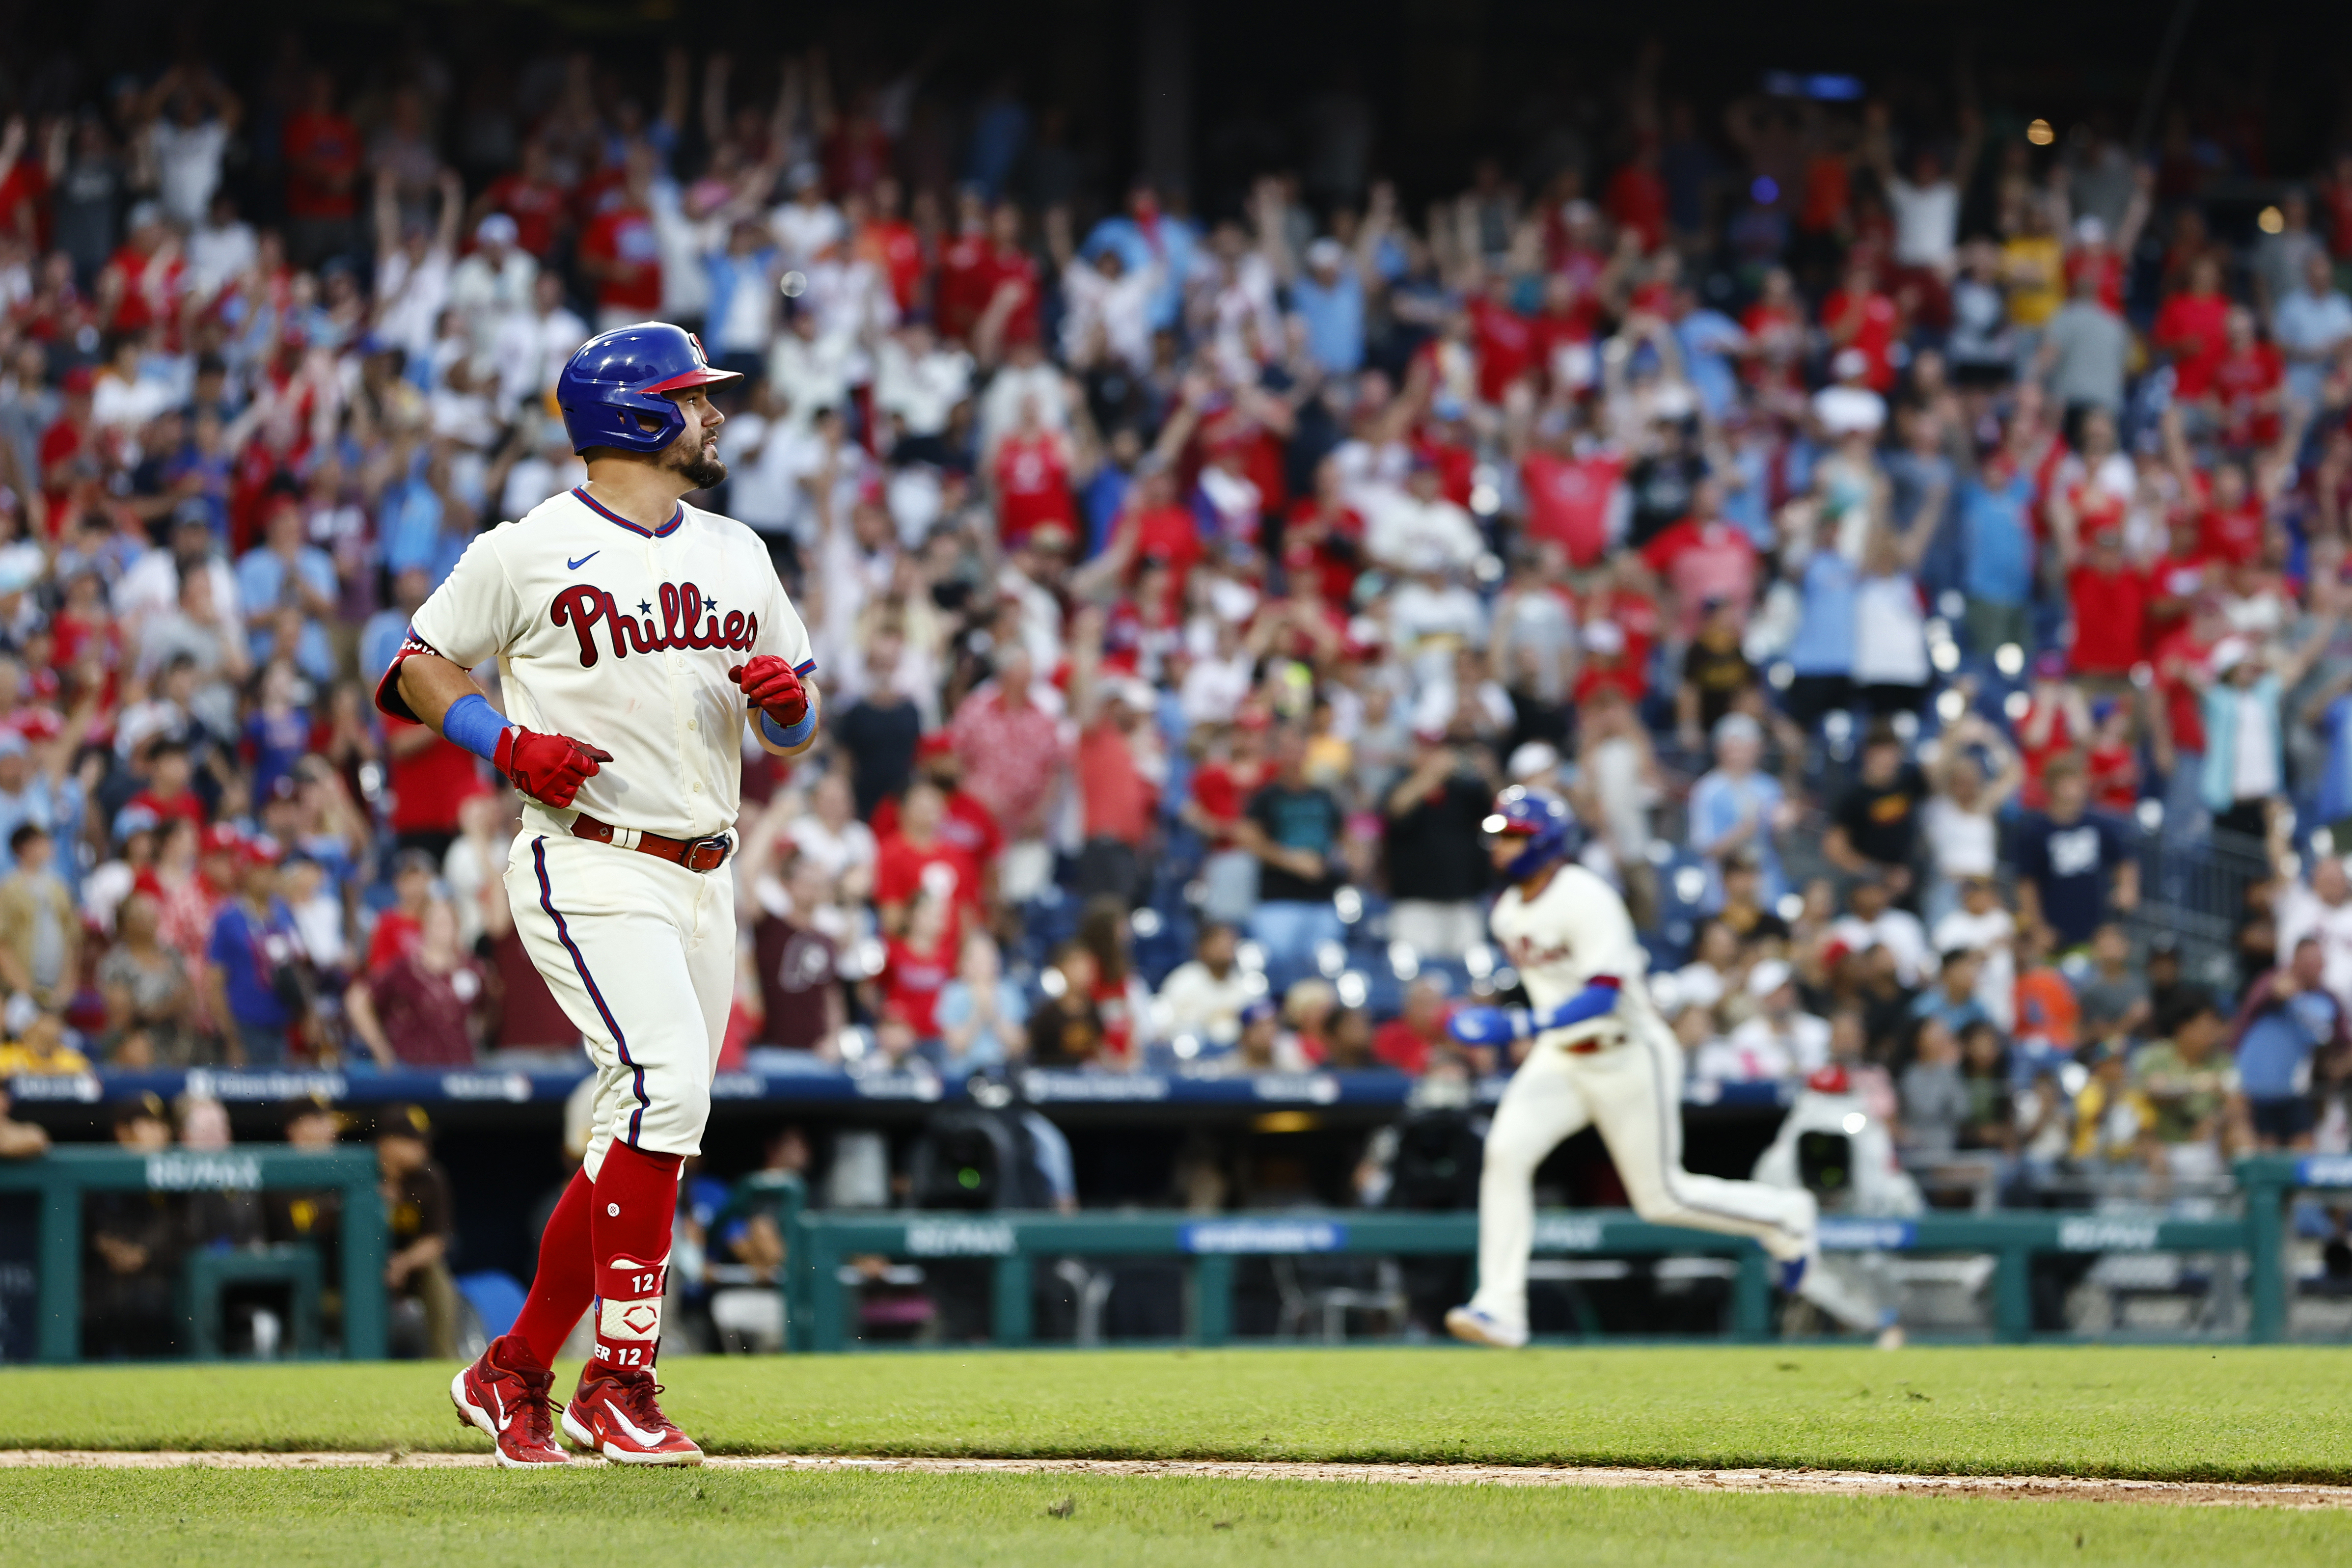 Kyle Schwarber homers, Bryce Harper ejected but Phillies fall to